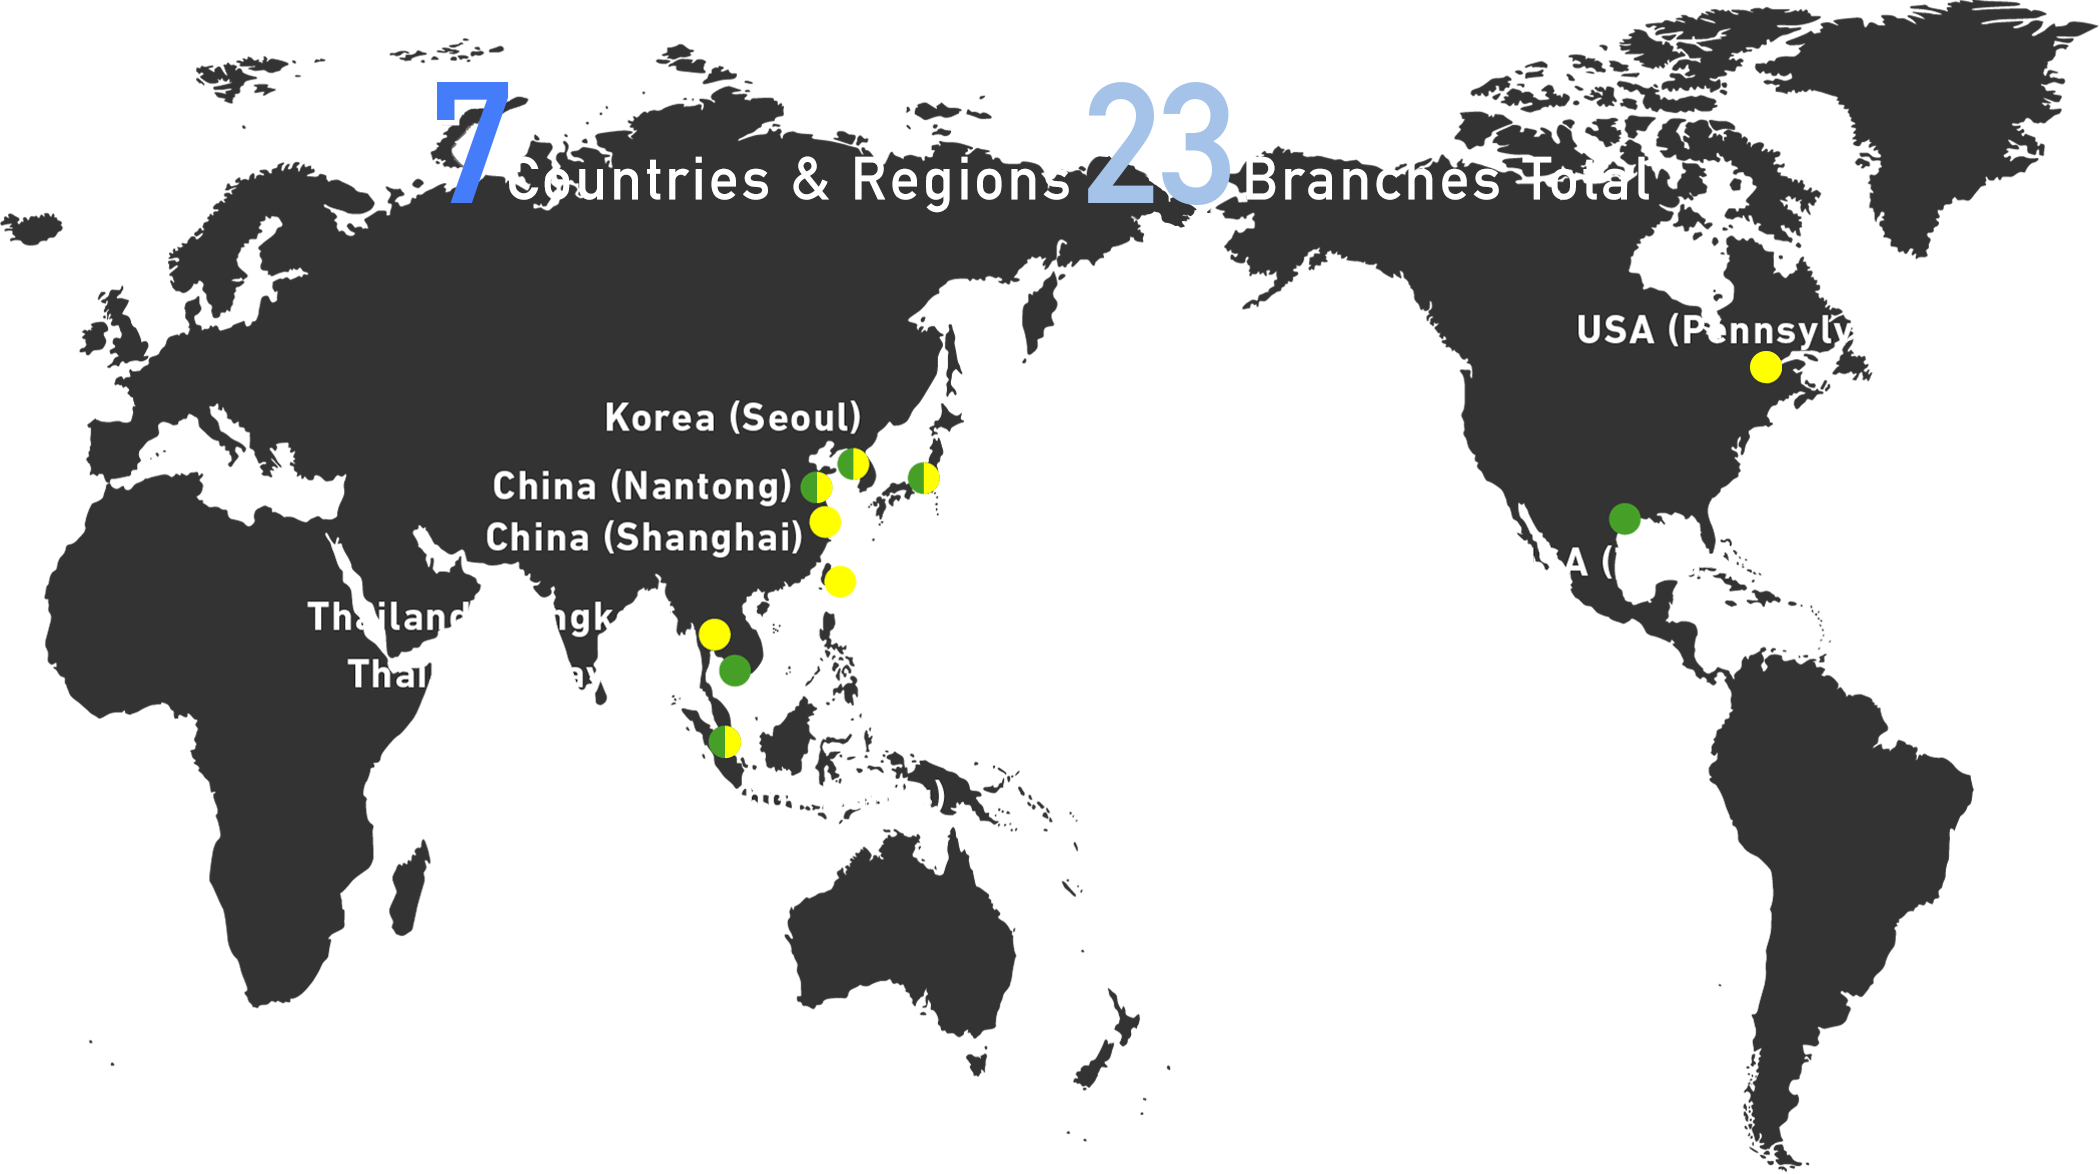 7Countries & Regions ２３Branches Total